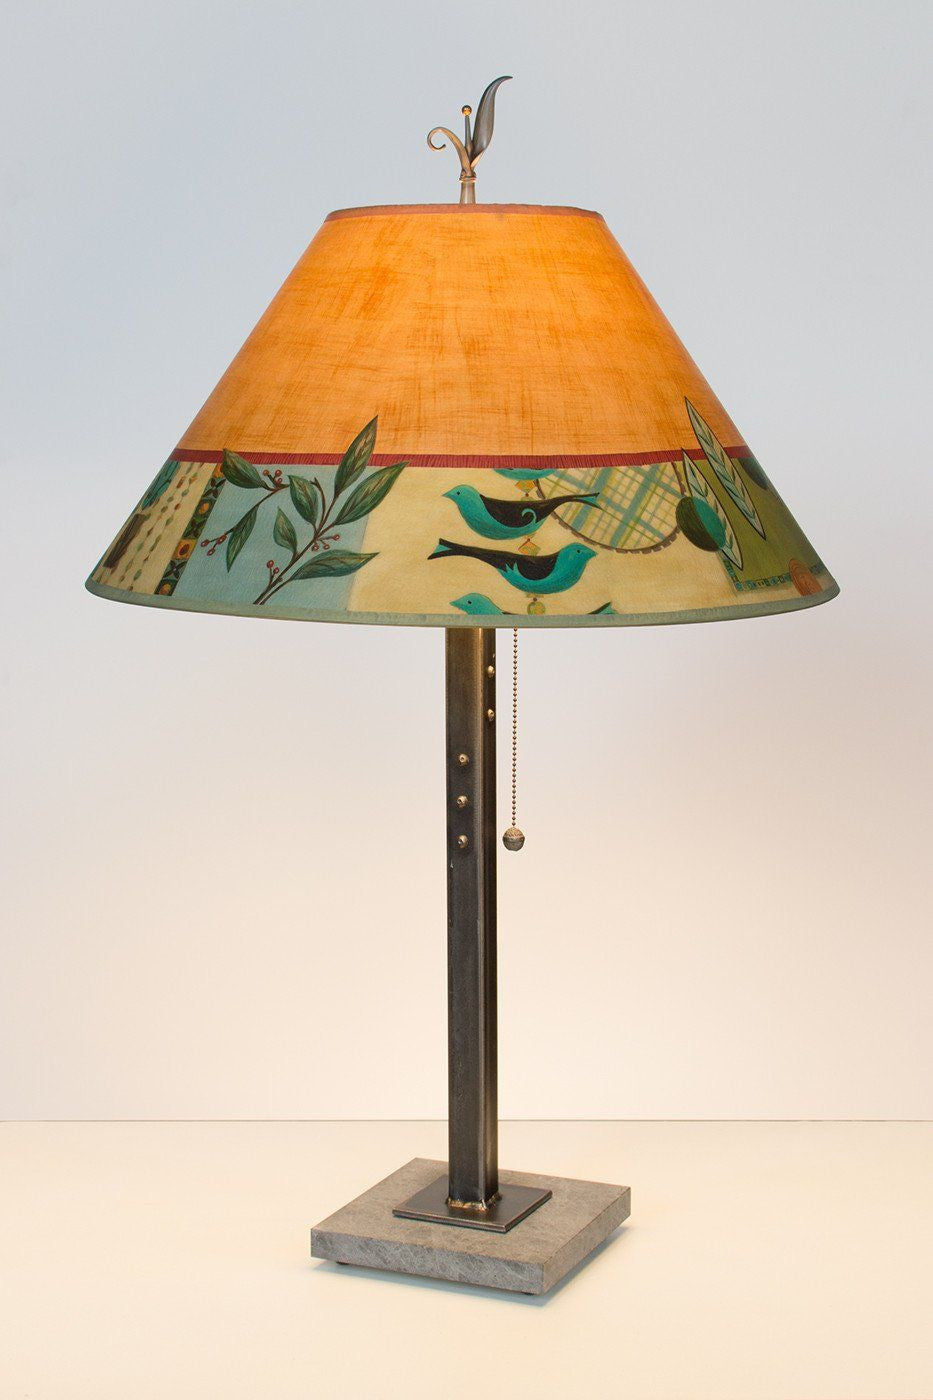 Steel Table Lamp on Italian Marble with Large Conical Shade in Spring Medley Spice